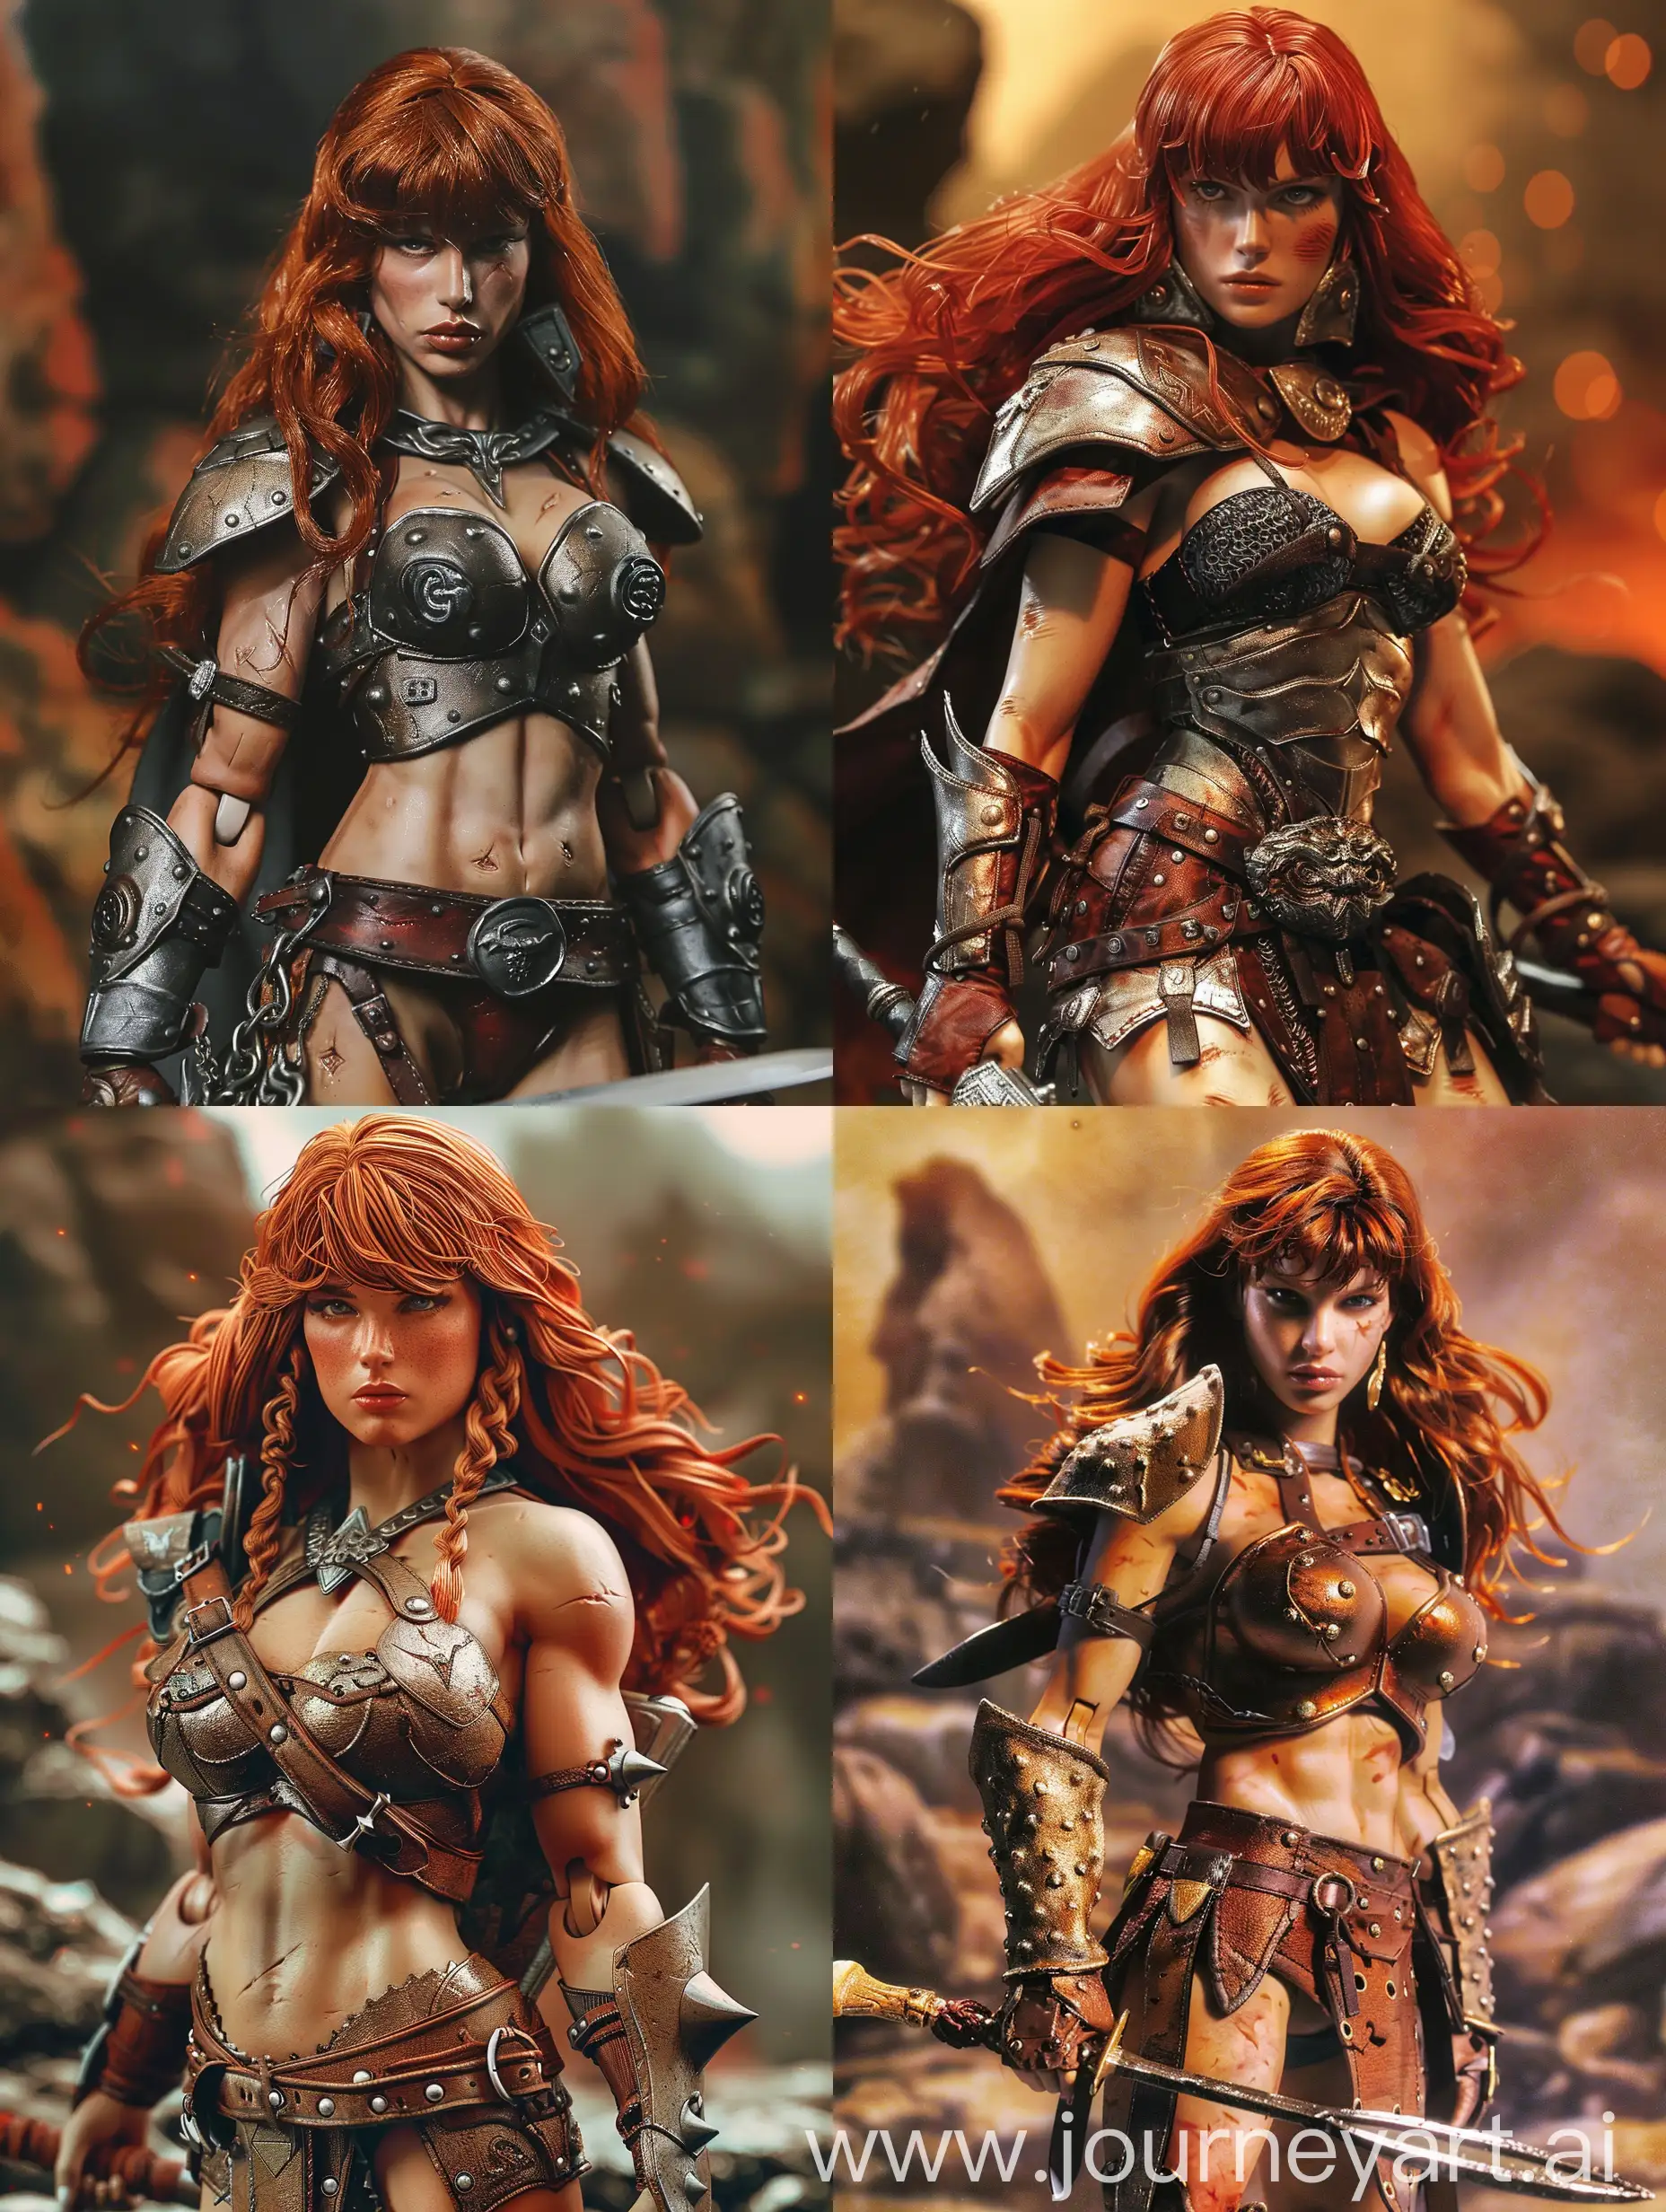 Dynamic-Battle-Scene-Featuring-Red-Sonja-in-Hyper-Realistic-Oil-Painting